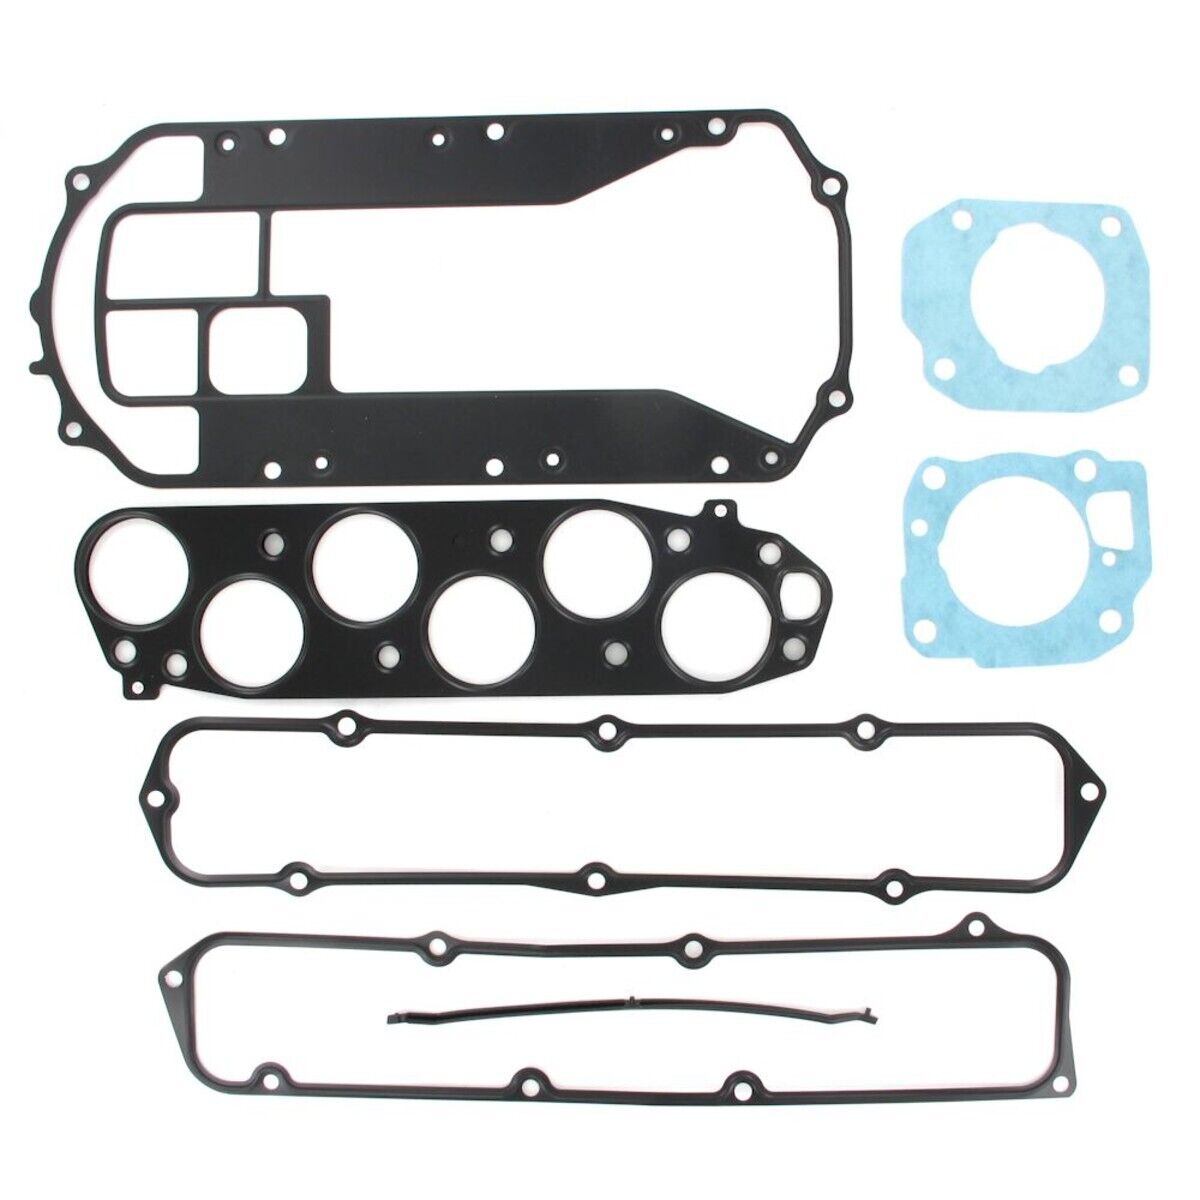 AMS1422 APEX Set Intake Manifold Gaskets for Acura TL CL 2001-2003